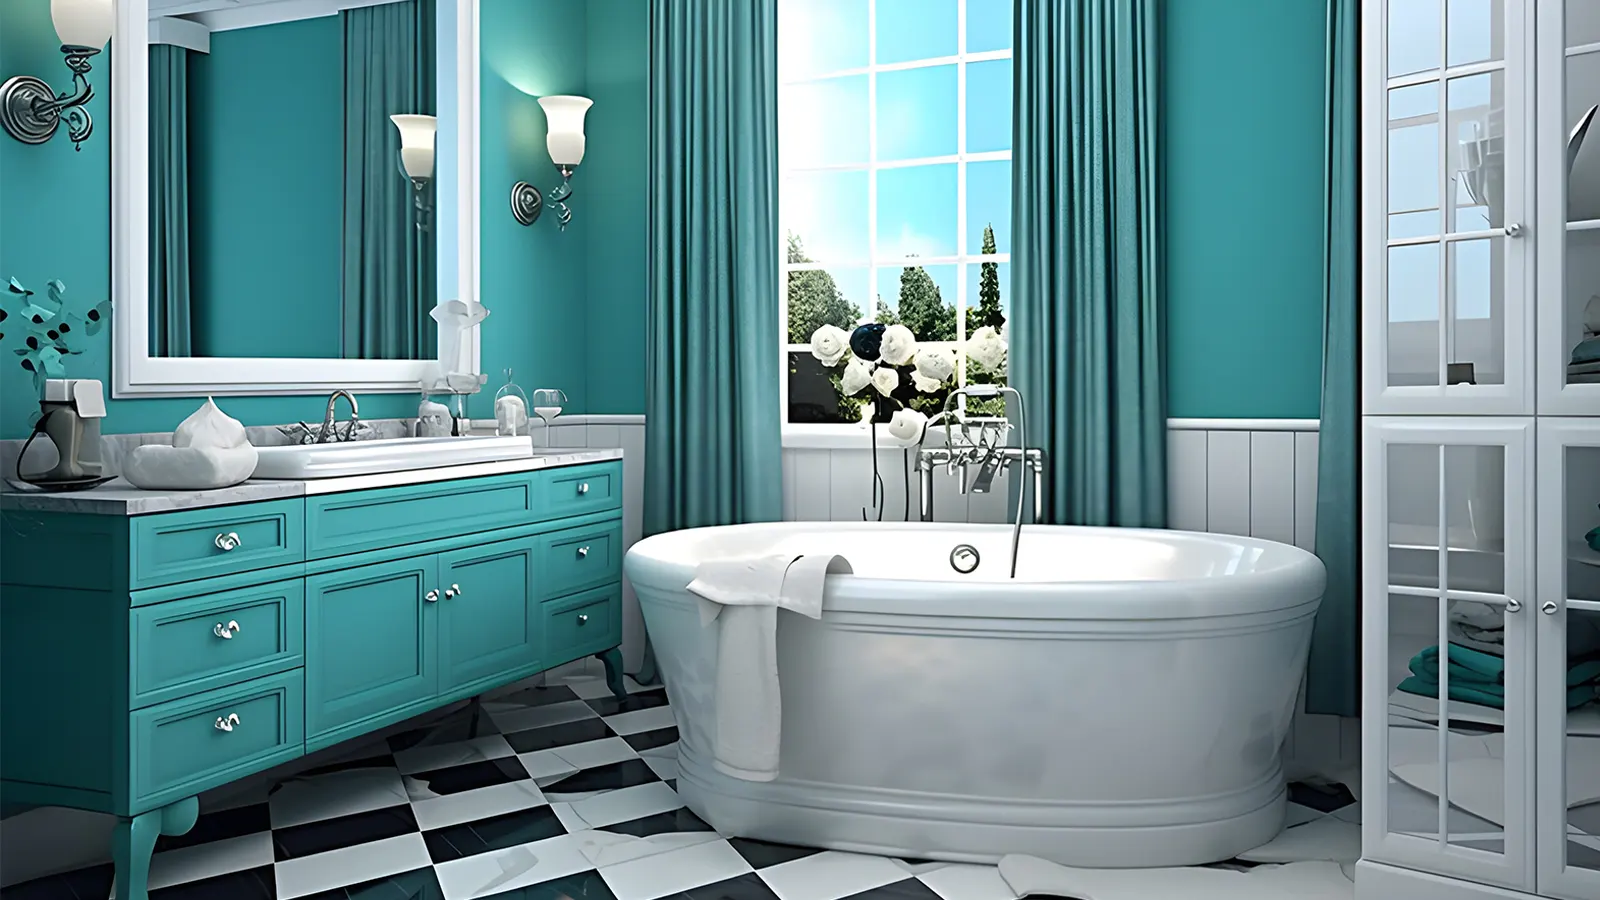 Discover the perfect way to decorate your apartment bathroom with a stunning combination of turquoise walls and a black and white checkered floor.